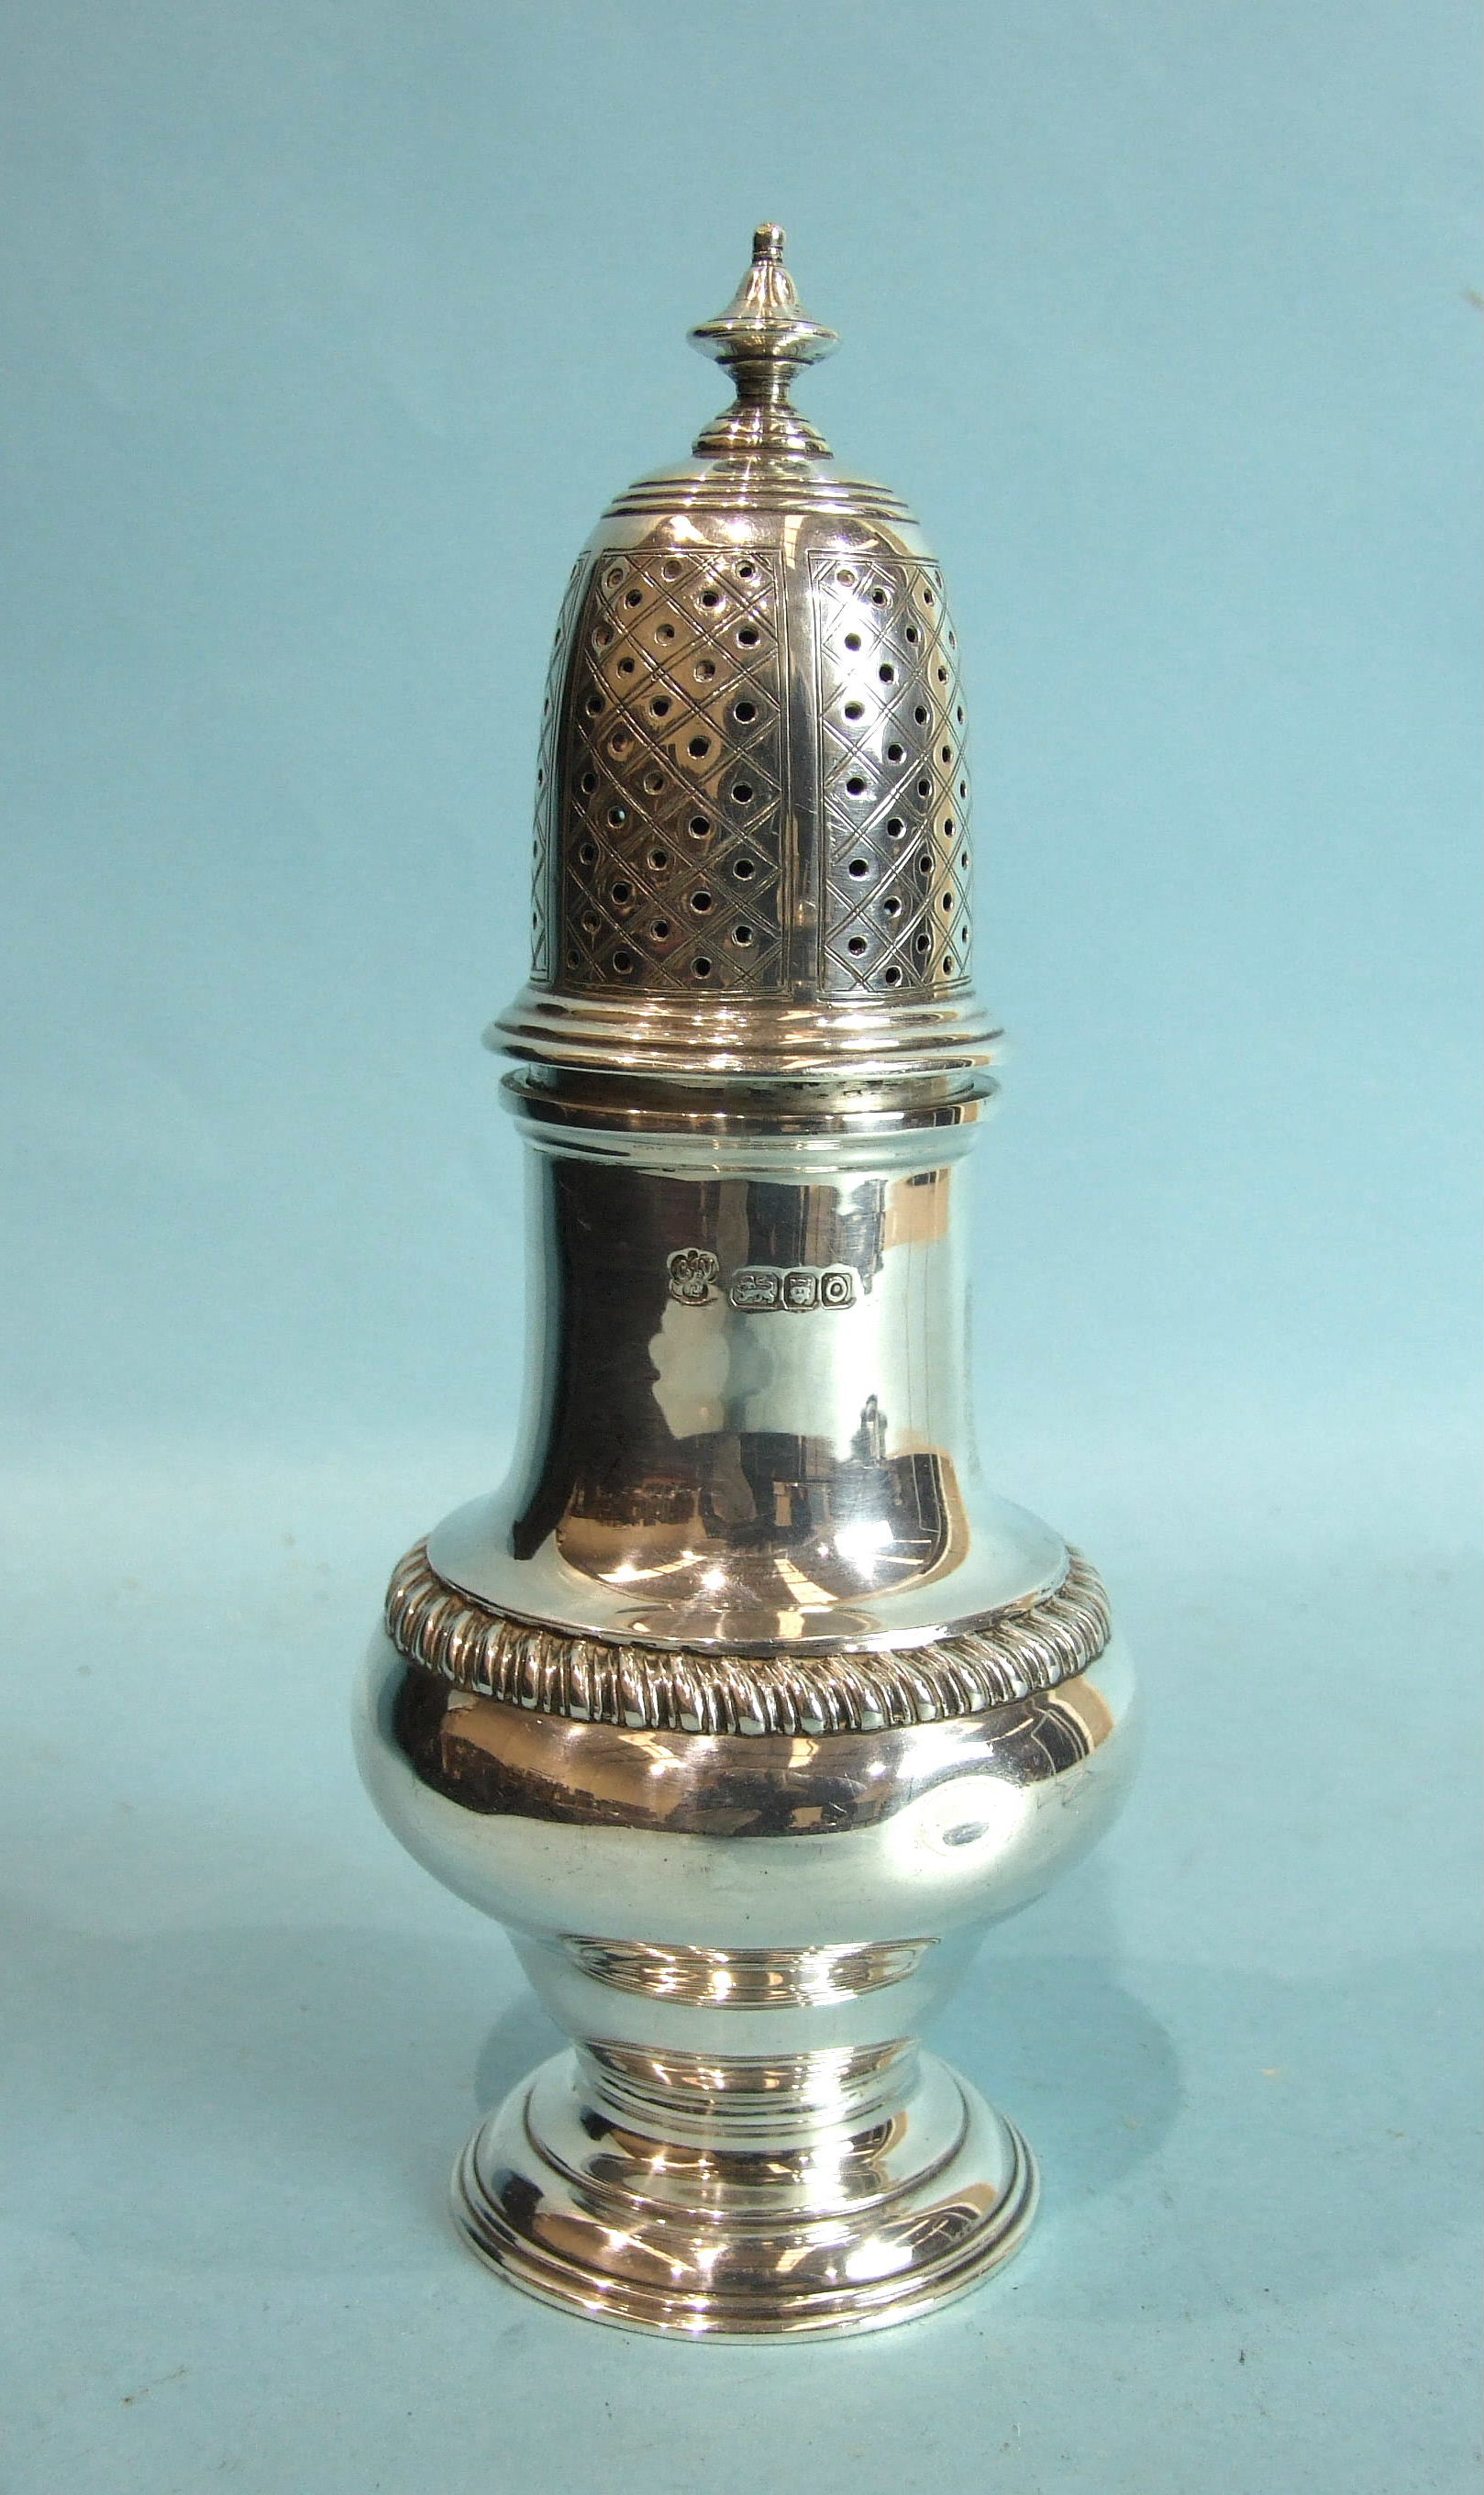 A heavy baluster-shaped sugar caster with finialled pierced cover and gadrooned girdle, on